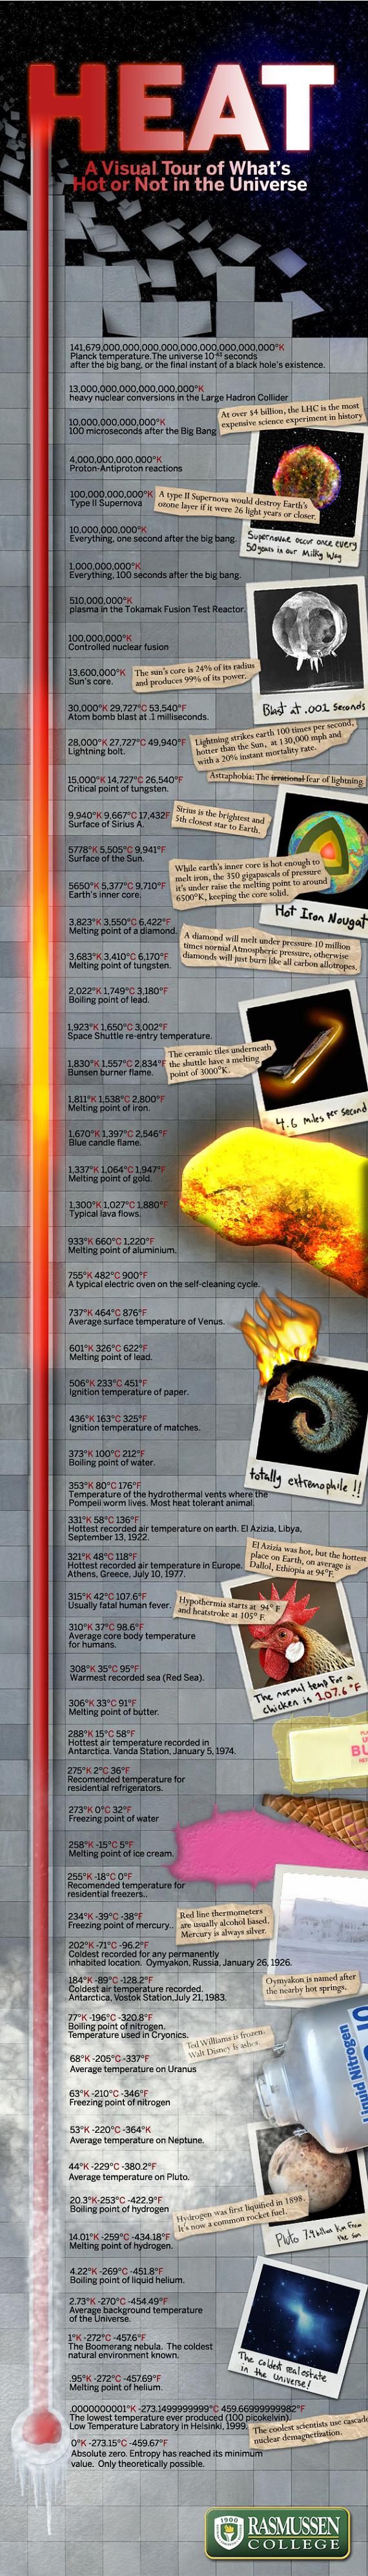 temperature from hottest to coldest infographic How to Grasp Size, Scale and Temperature with Three Giant Infographics